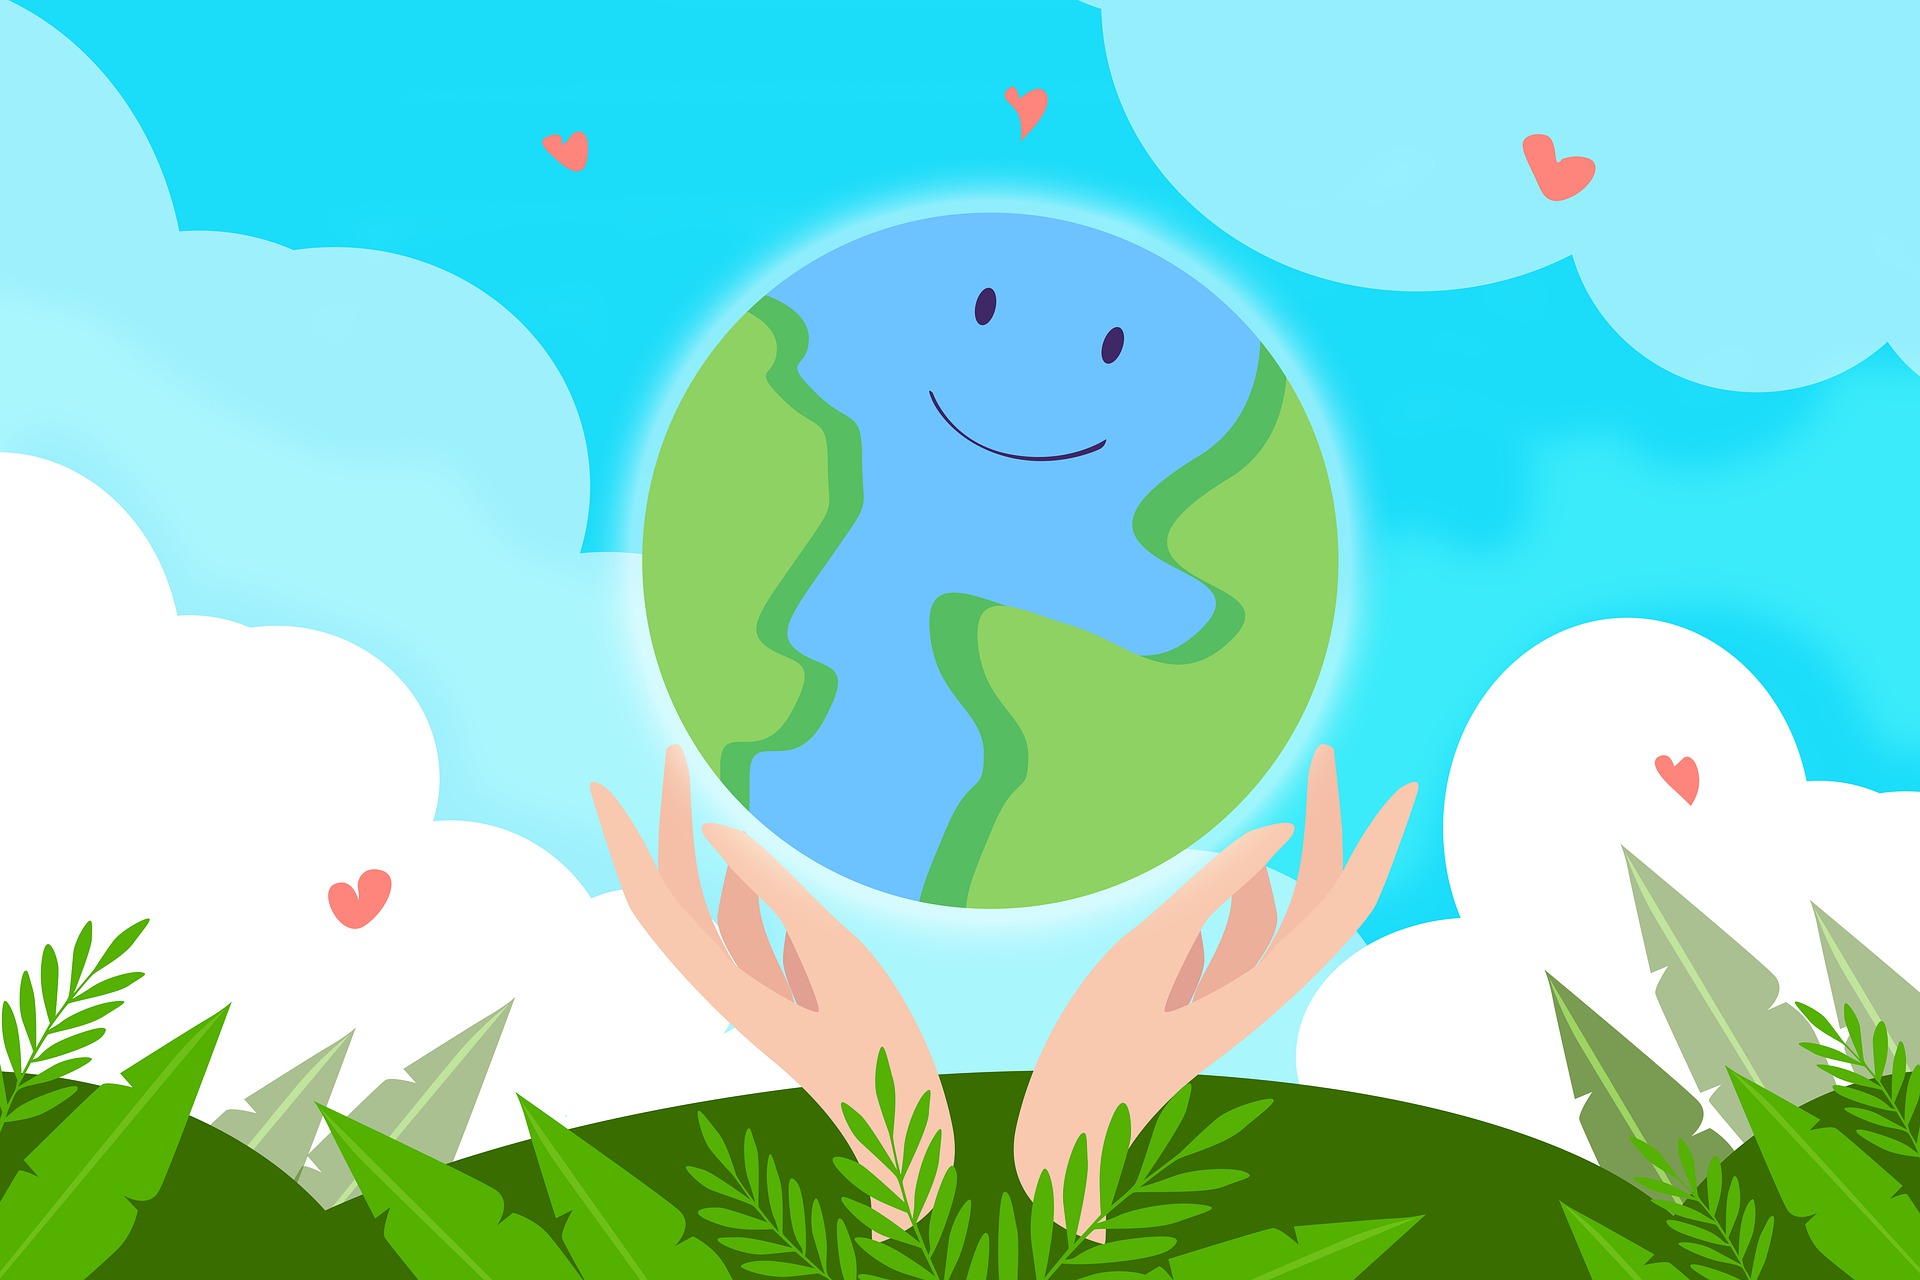 Smiling earth being held up by hands